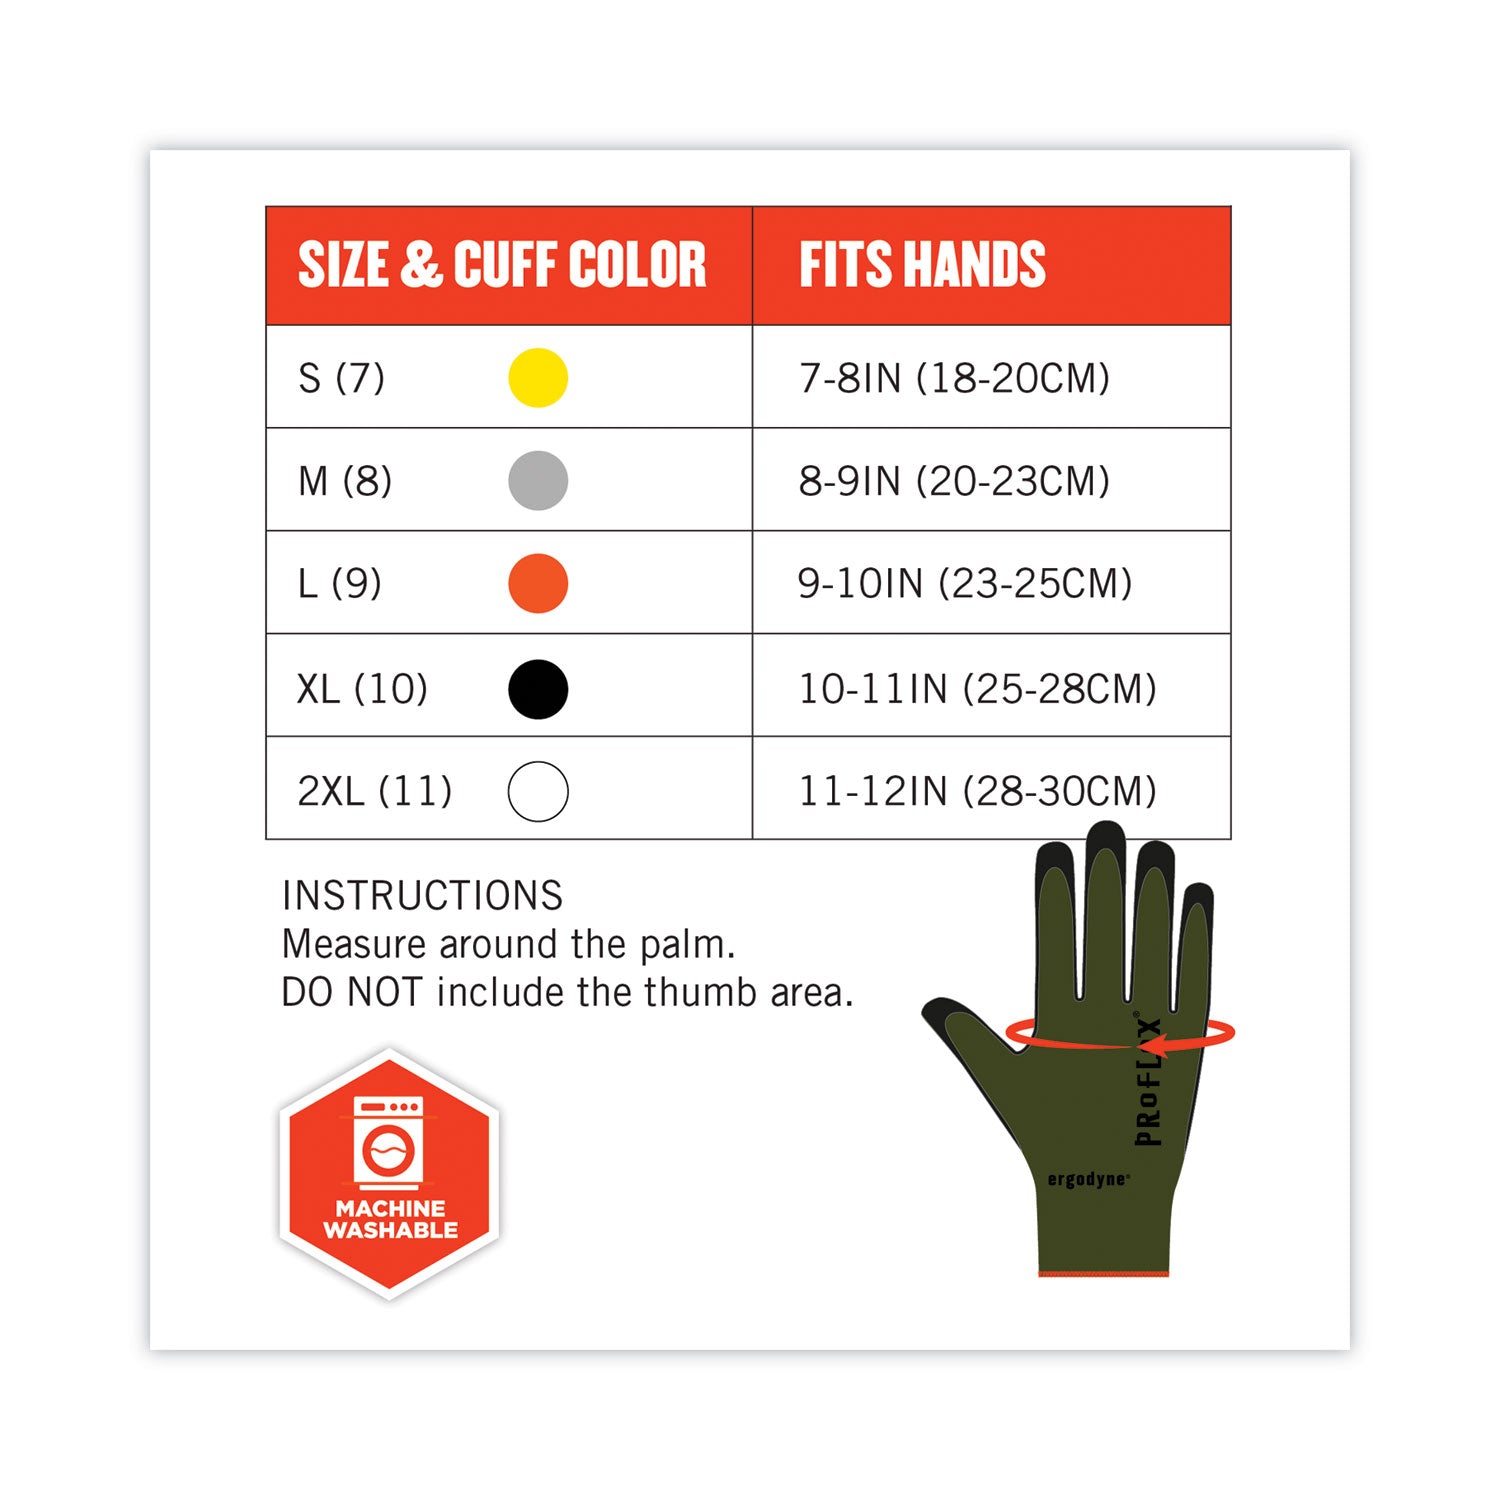 proflex-7042-ansi-a4-nitrile-coated-cr-gloves-green-large-12-pairs-pack-ships-in-1-3-business-days_ego10334 - 5